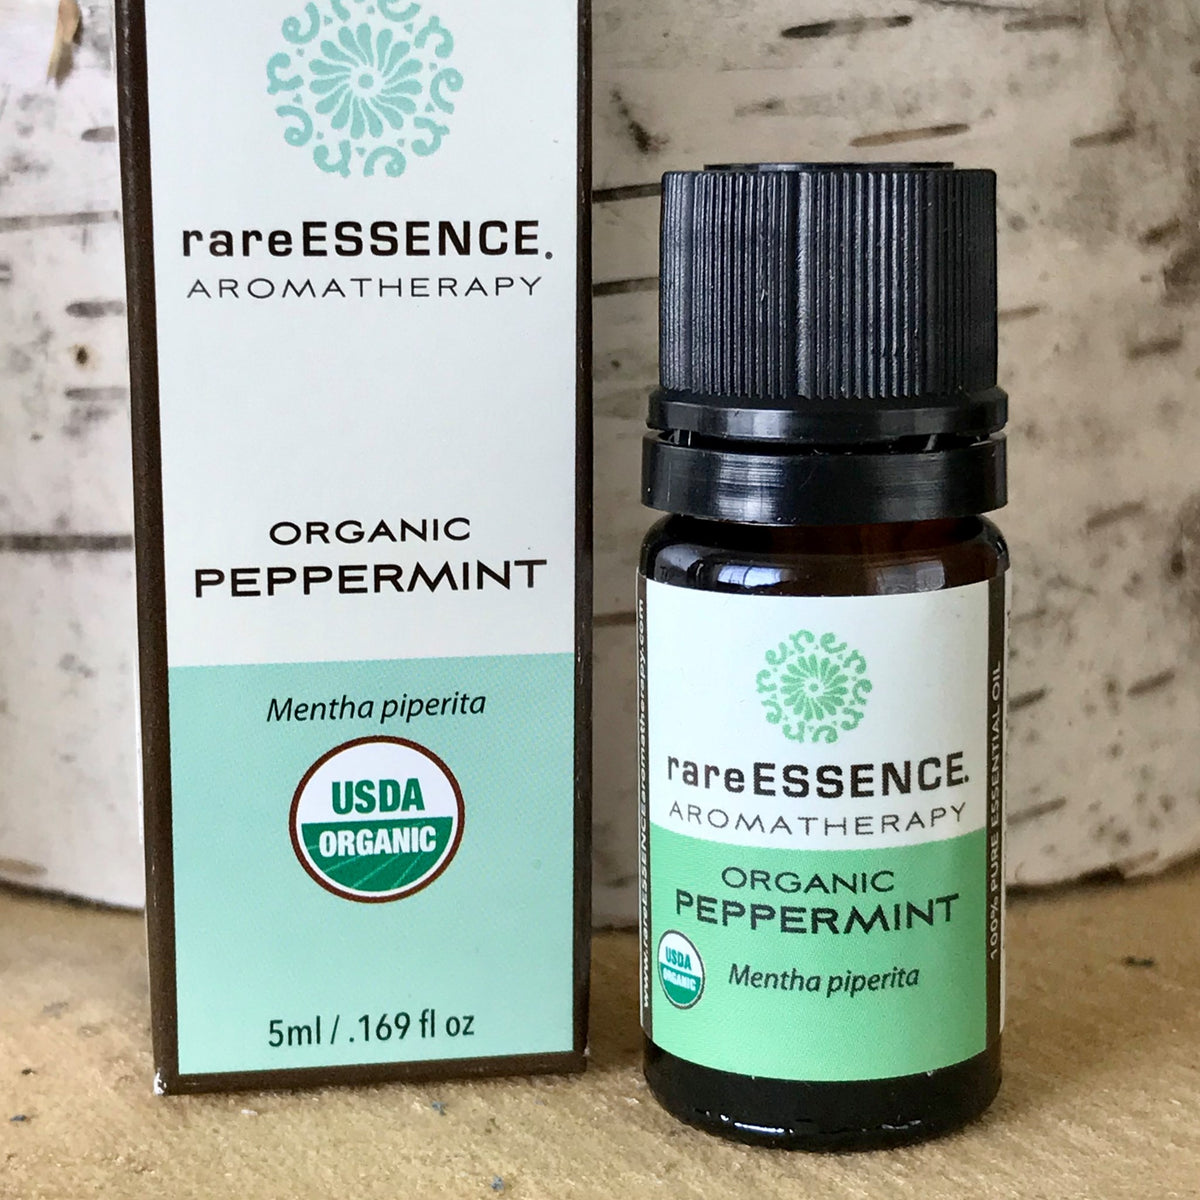 Bottle of organic Peppermint essential oil by Rare Essence